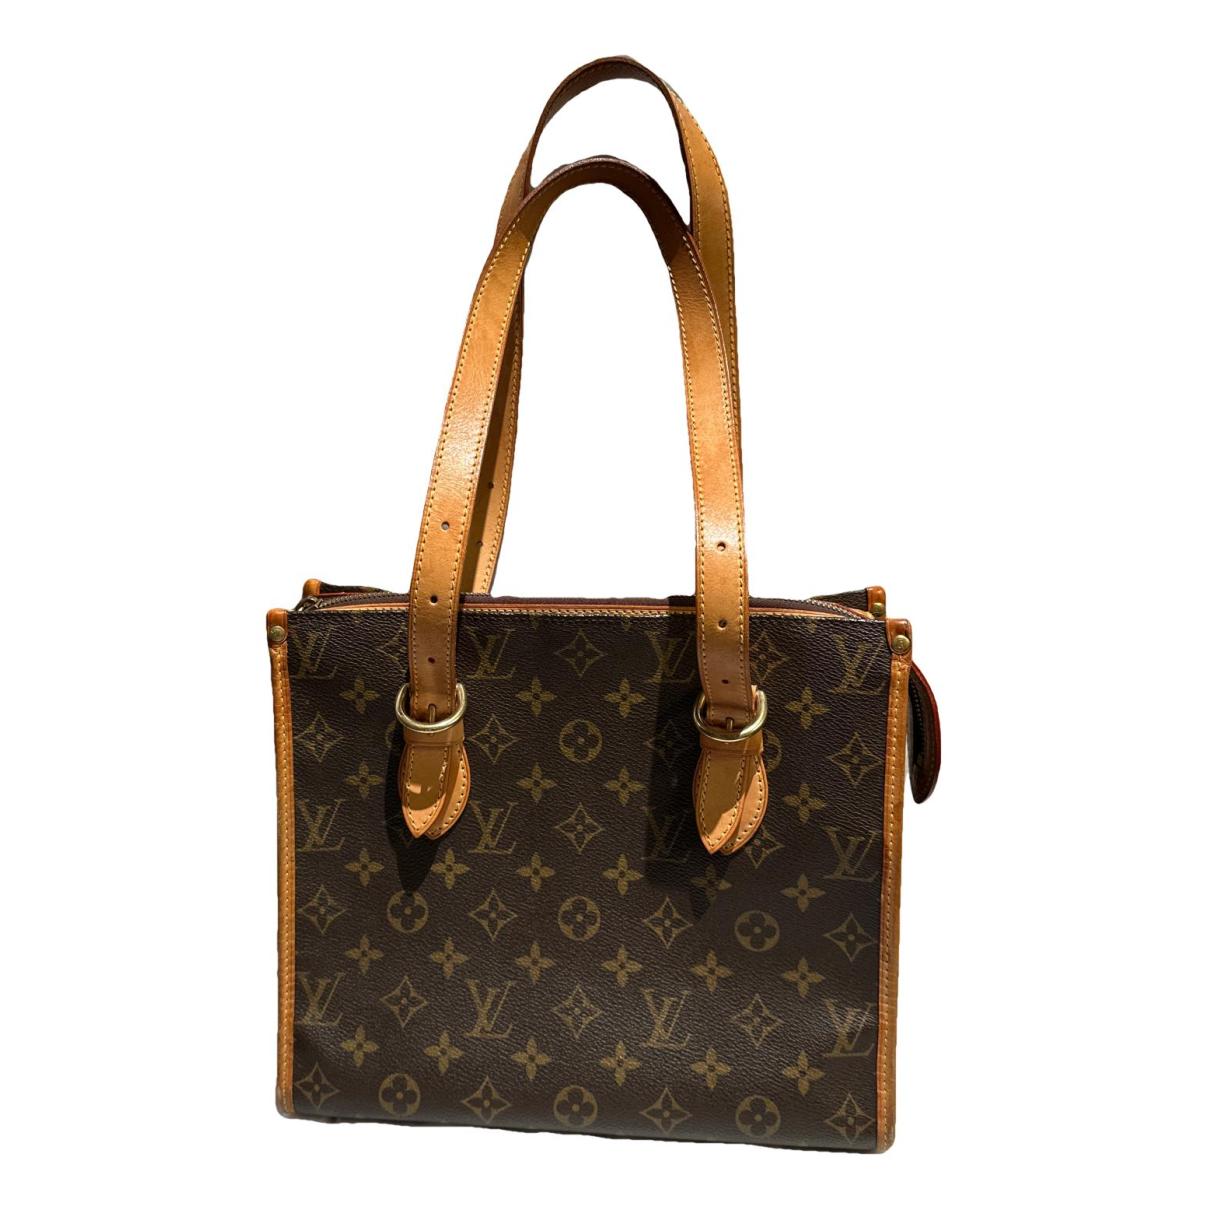 Buy [Used] LOUIS VUITTON Popincourt O Shoulder Bag Tote Bag Monogram M40007  from Japan - Buy authentic Plus exclusive items from Japan